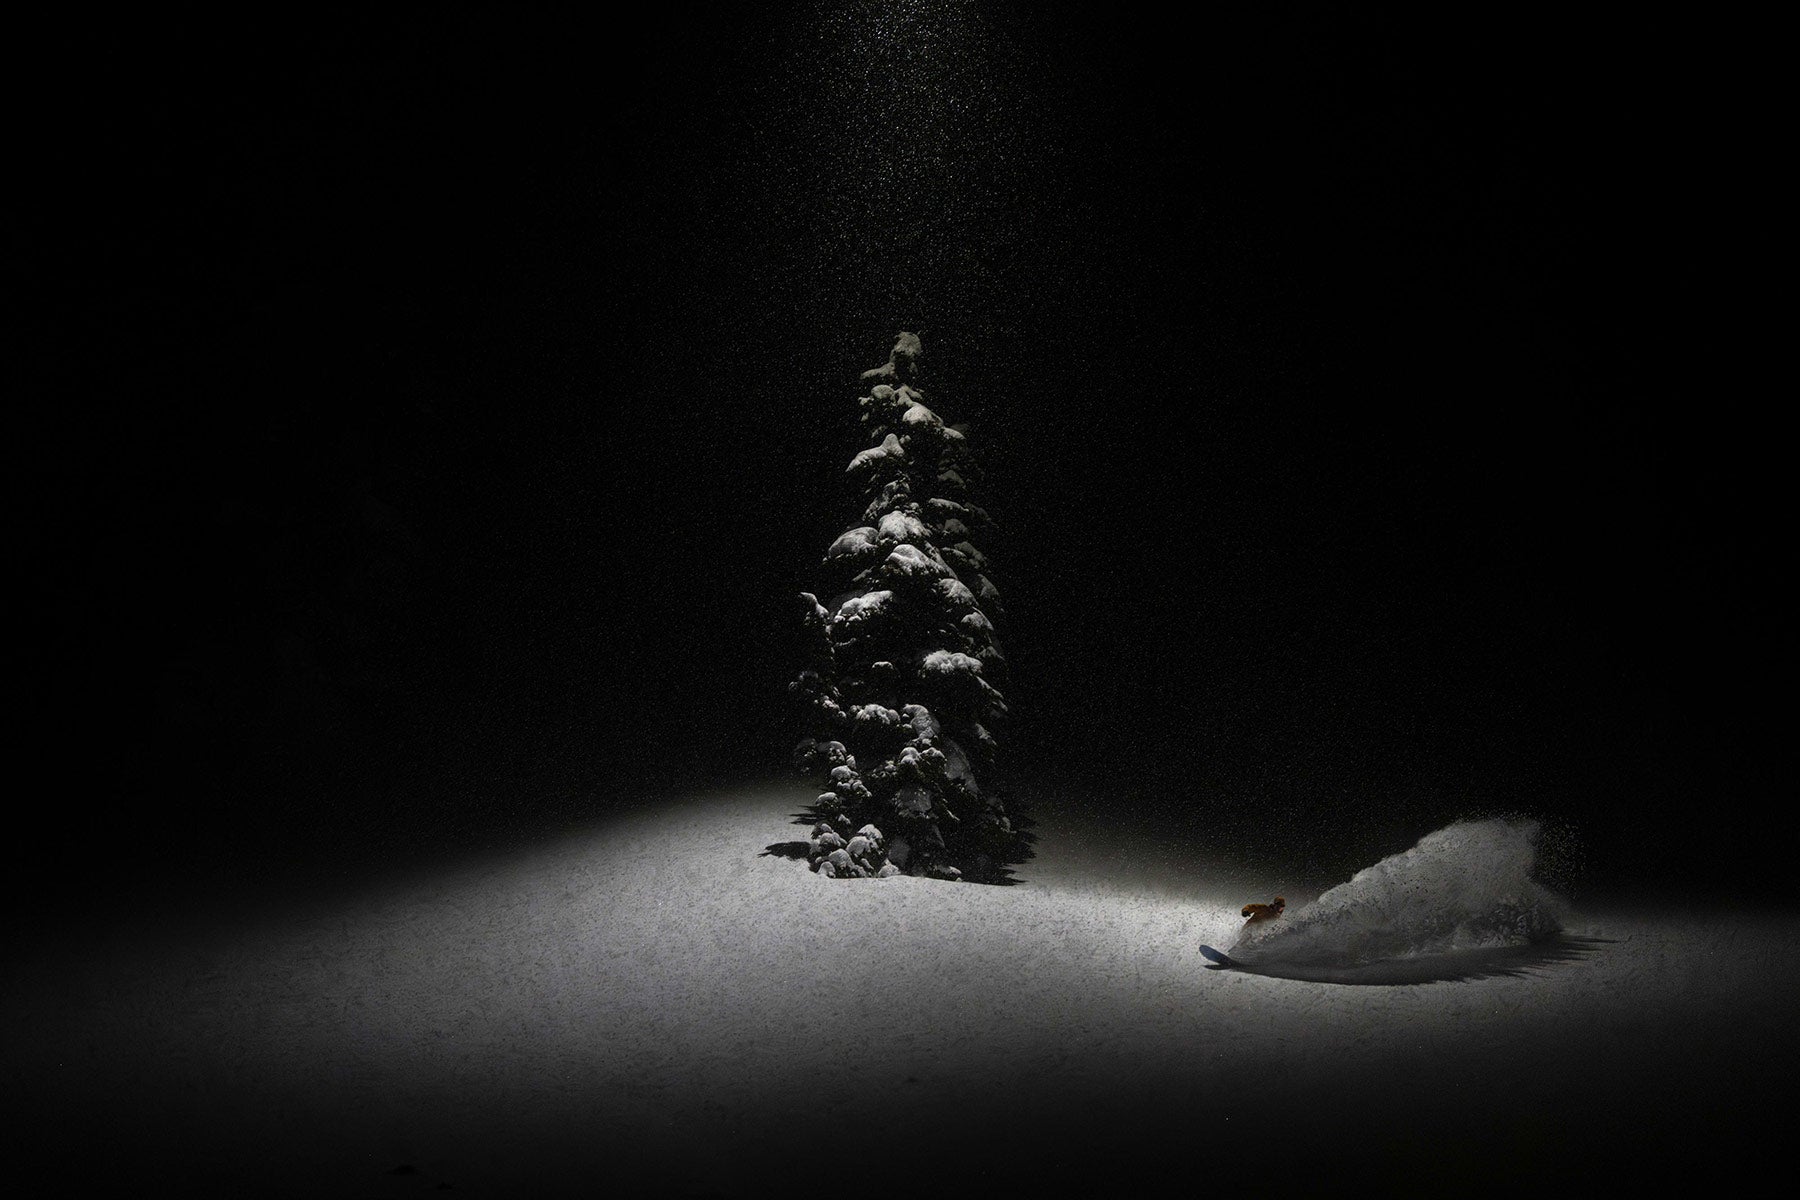 A snowboarder sprays snow next to a solitary tree at night, illuminated like a spotlight with snow falling around it.